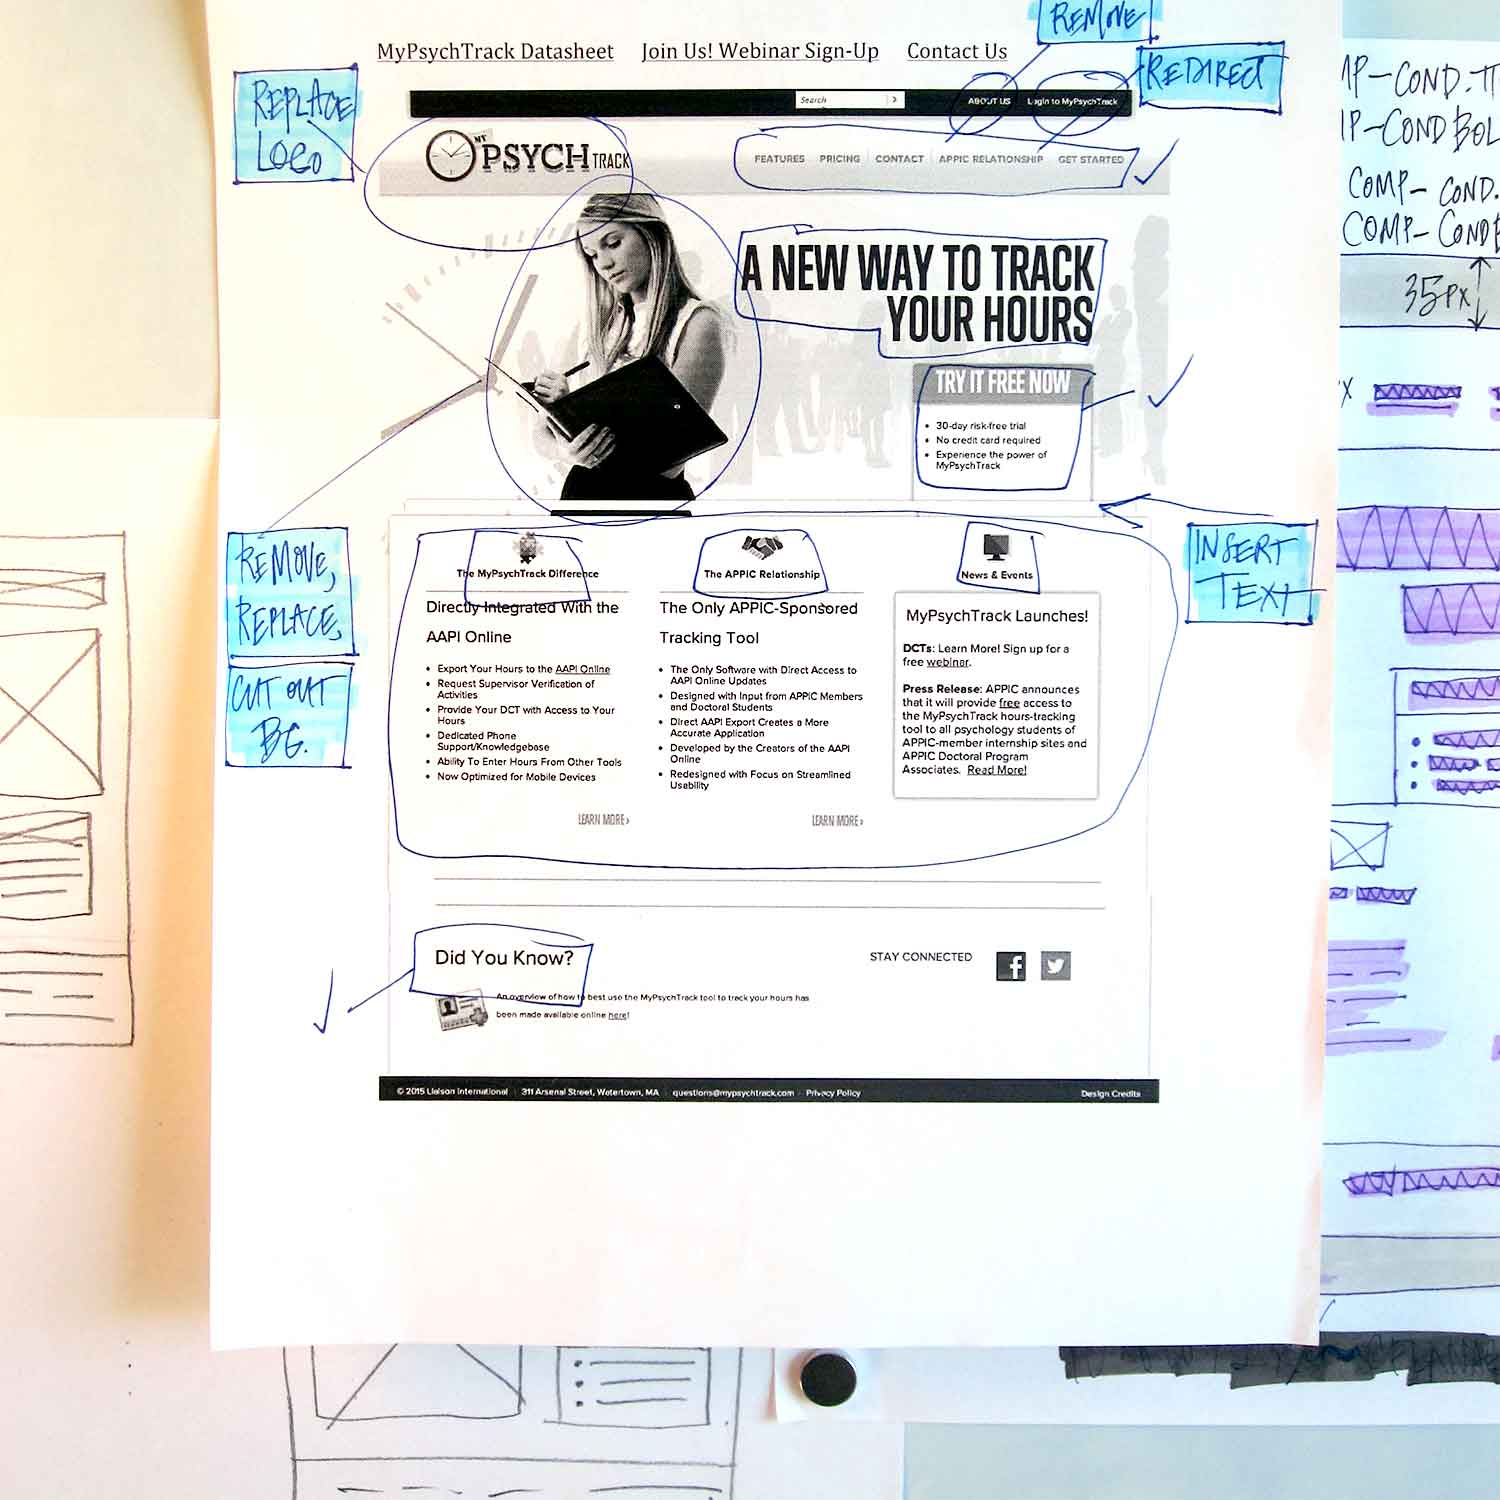 a photograph of some notes regarding the development of the MyPsychTrack marketing website